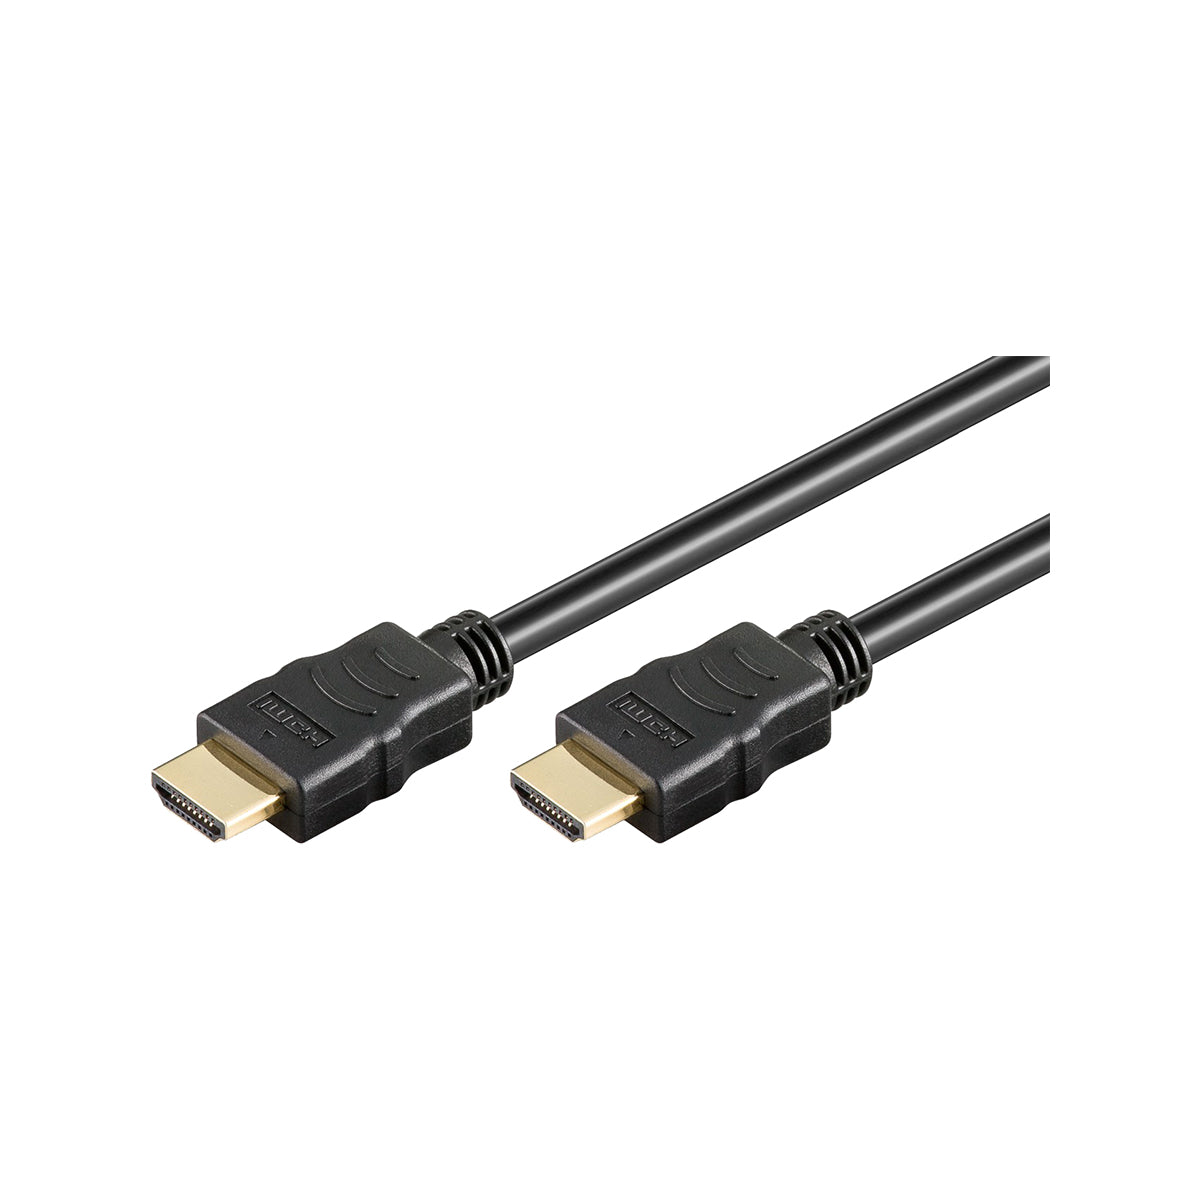 Goobay High Speed HDMI™ Cable with Ethernet (4K@60Hz) 5M for Laptops